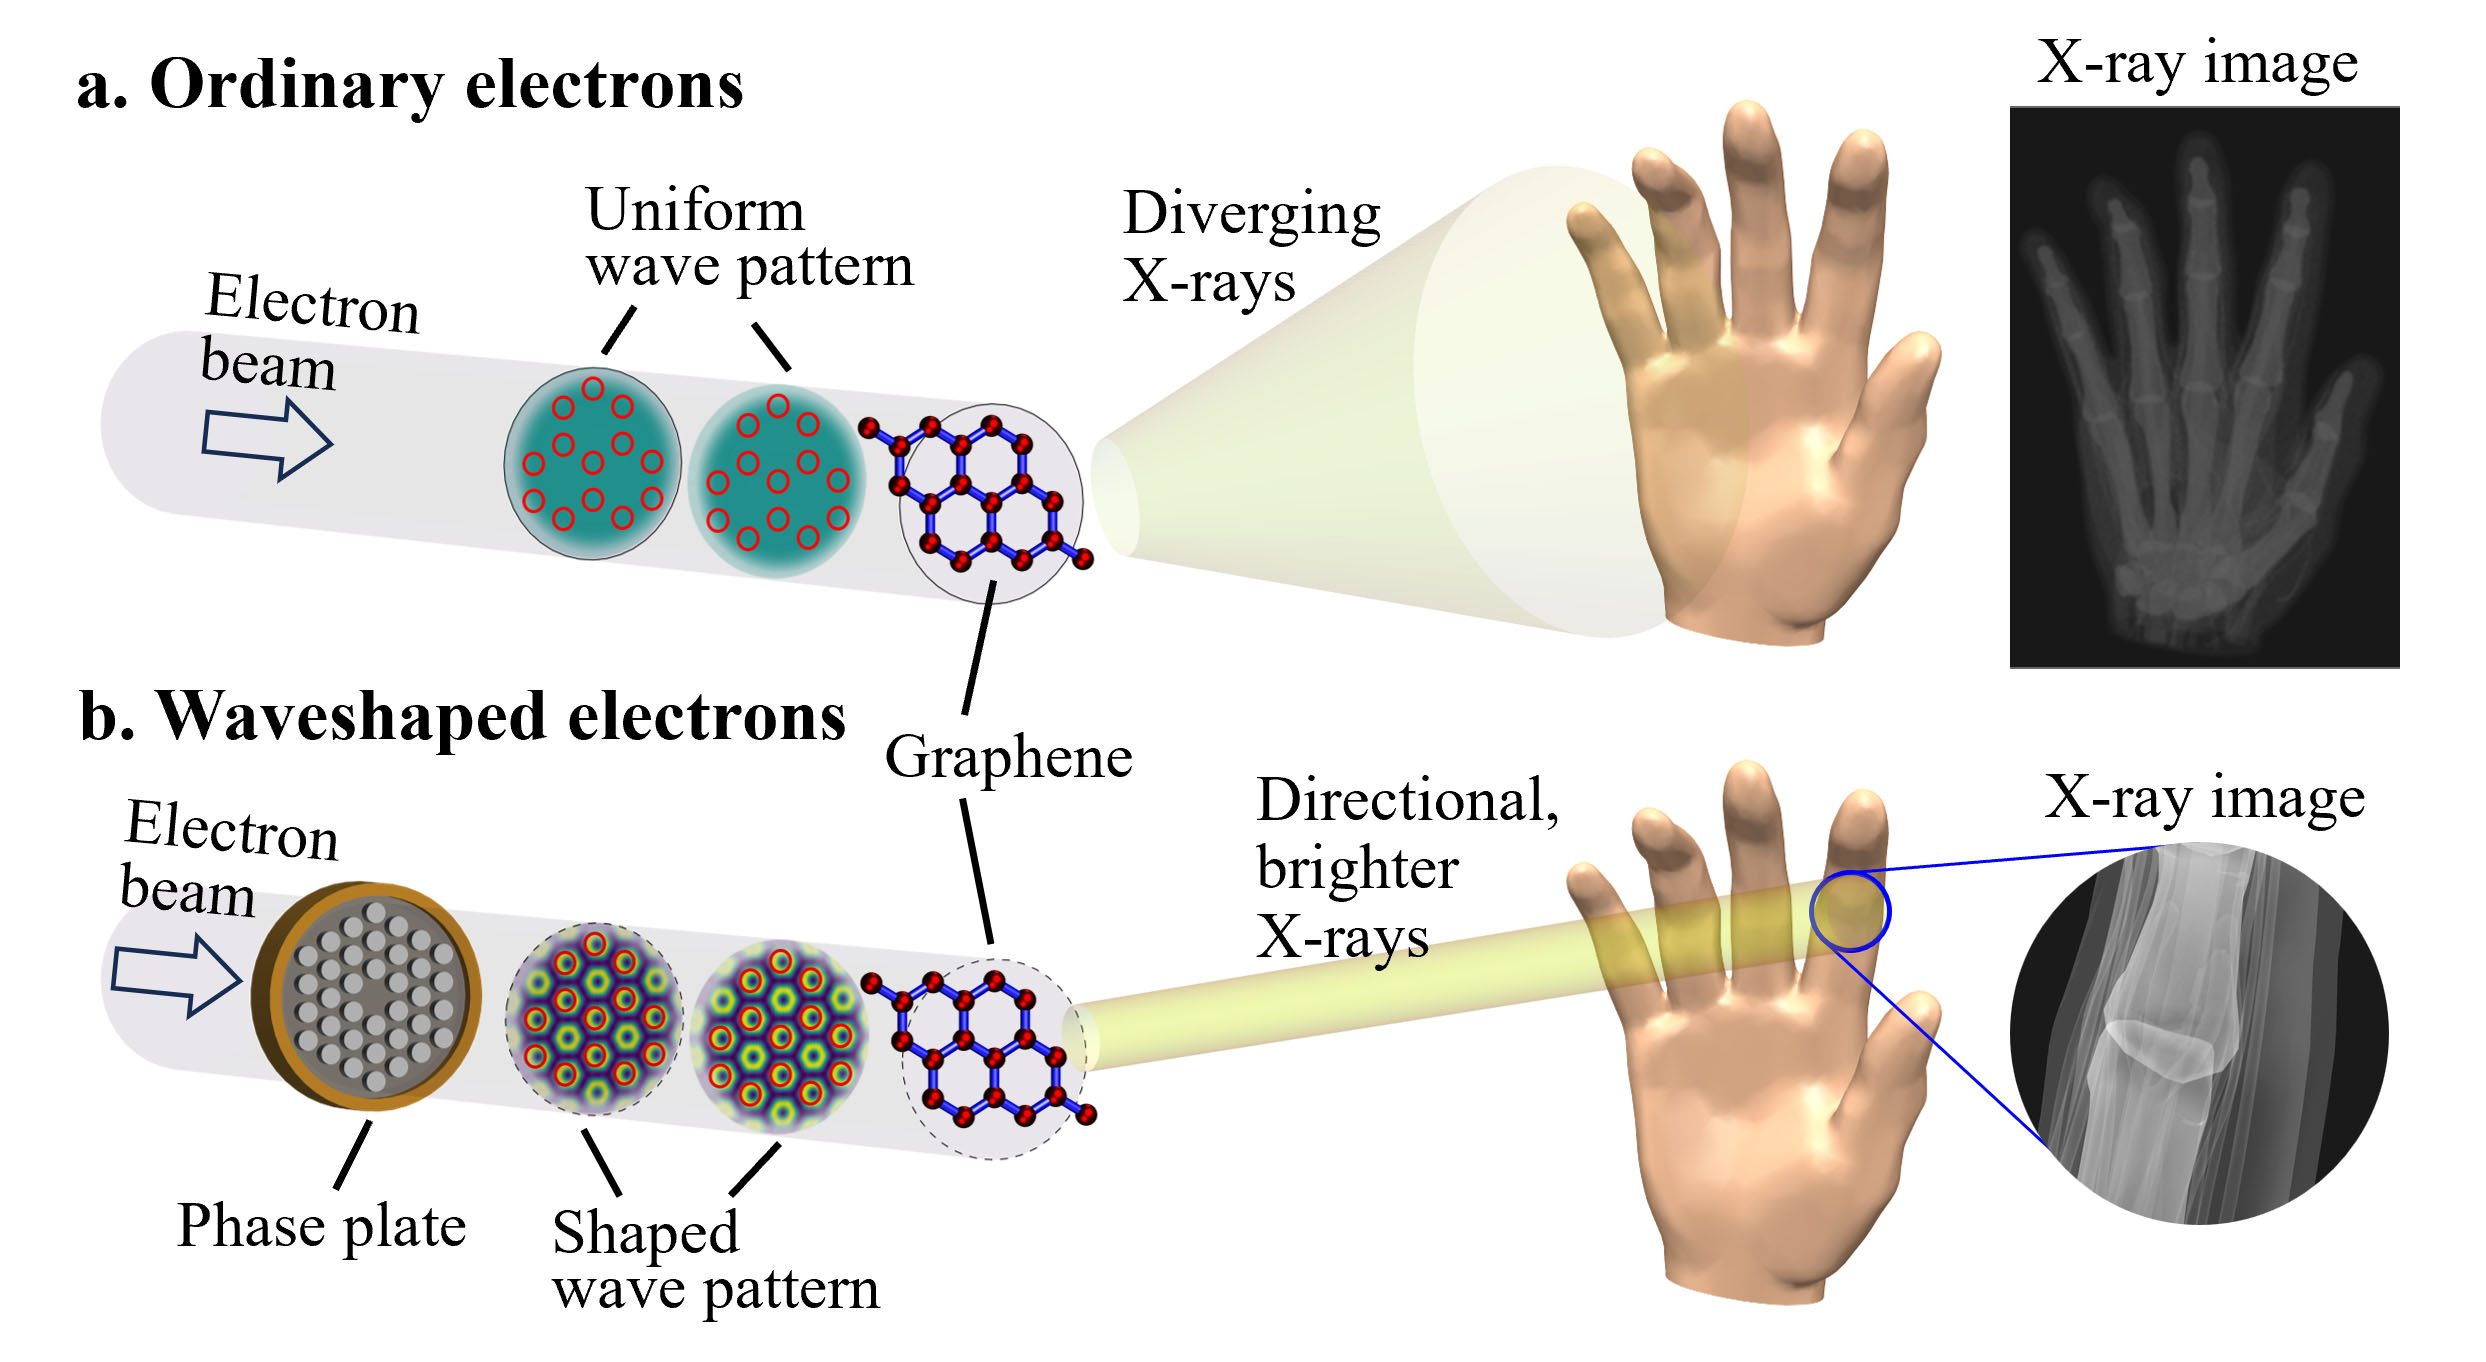 X-ray image of ordinary electrons or waveshaped electrons